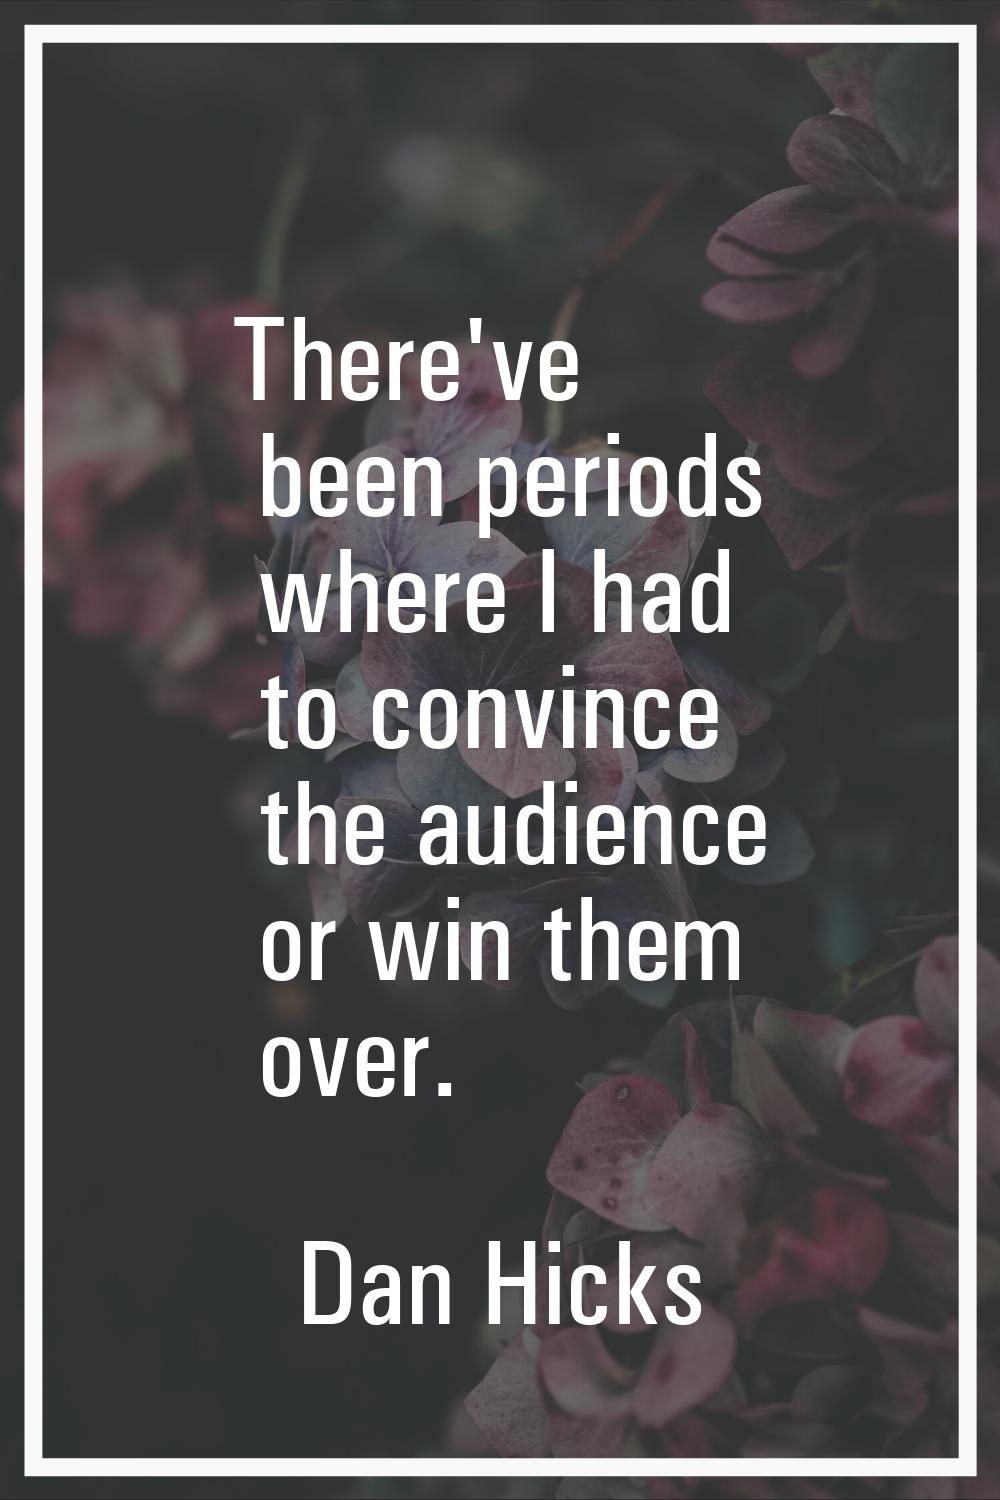 There've been periods where I had to convince the audience or win them over.